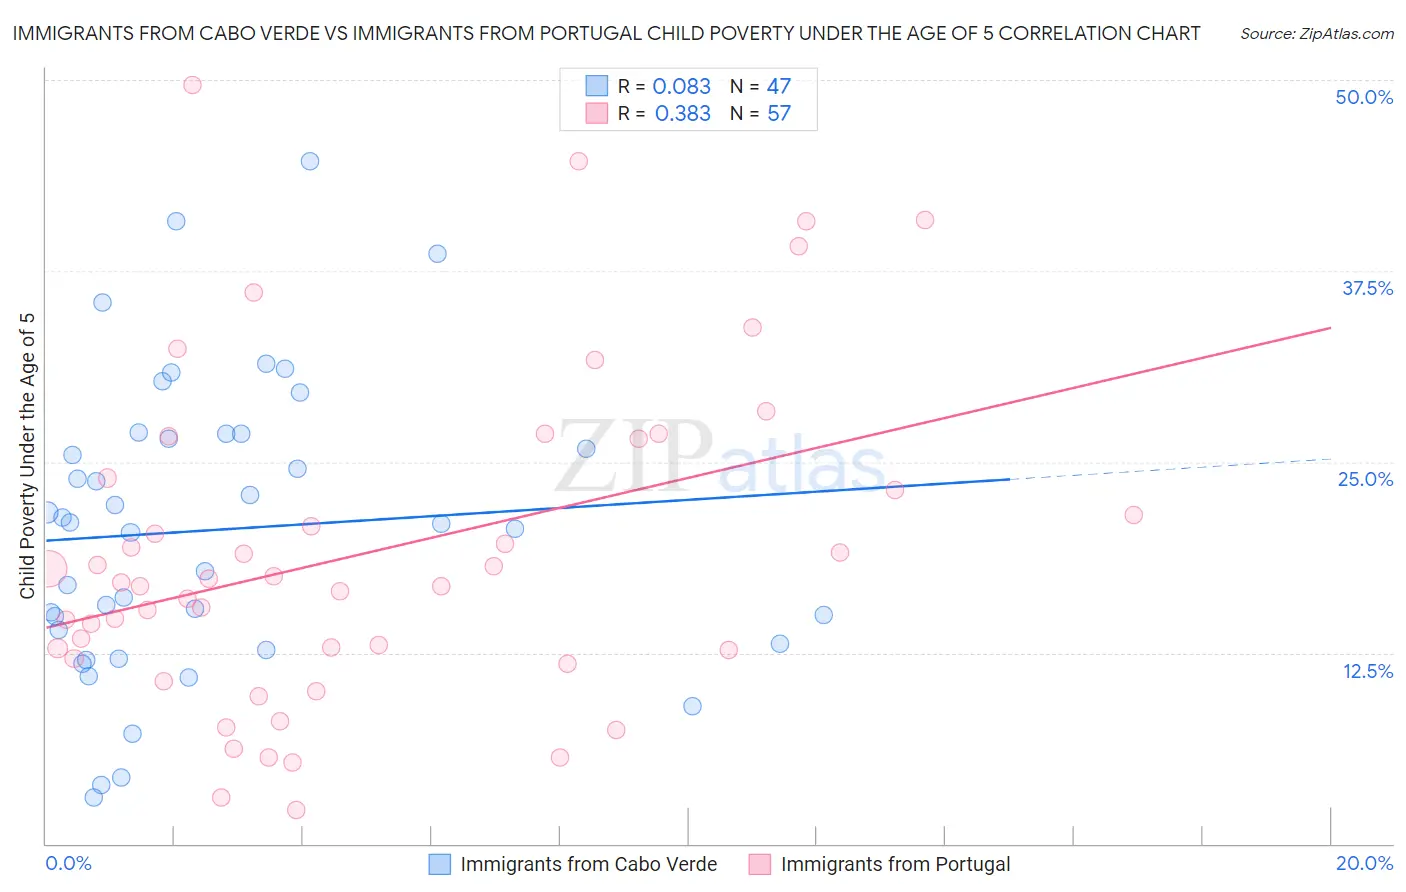 Immigrants from Cabo Verde vs Immigrants from Portugal Child Poverty Under the Age of 5